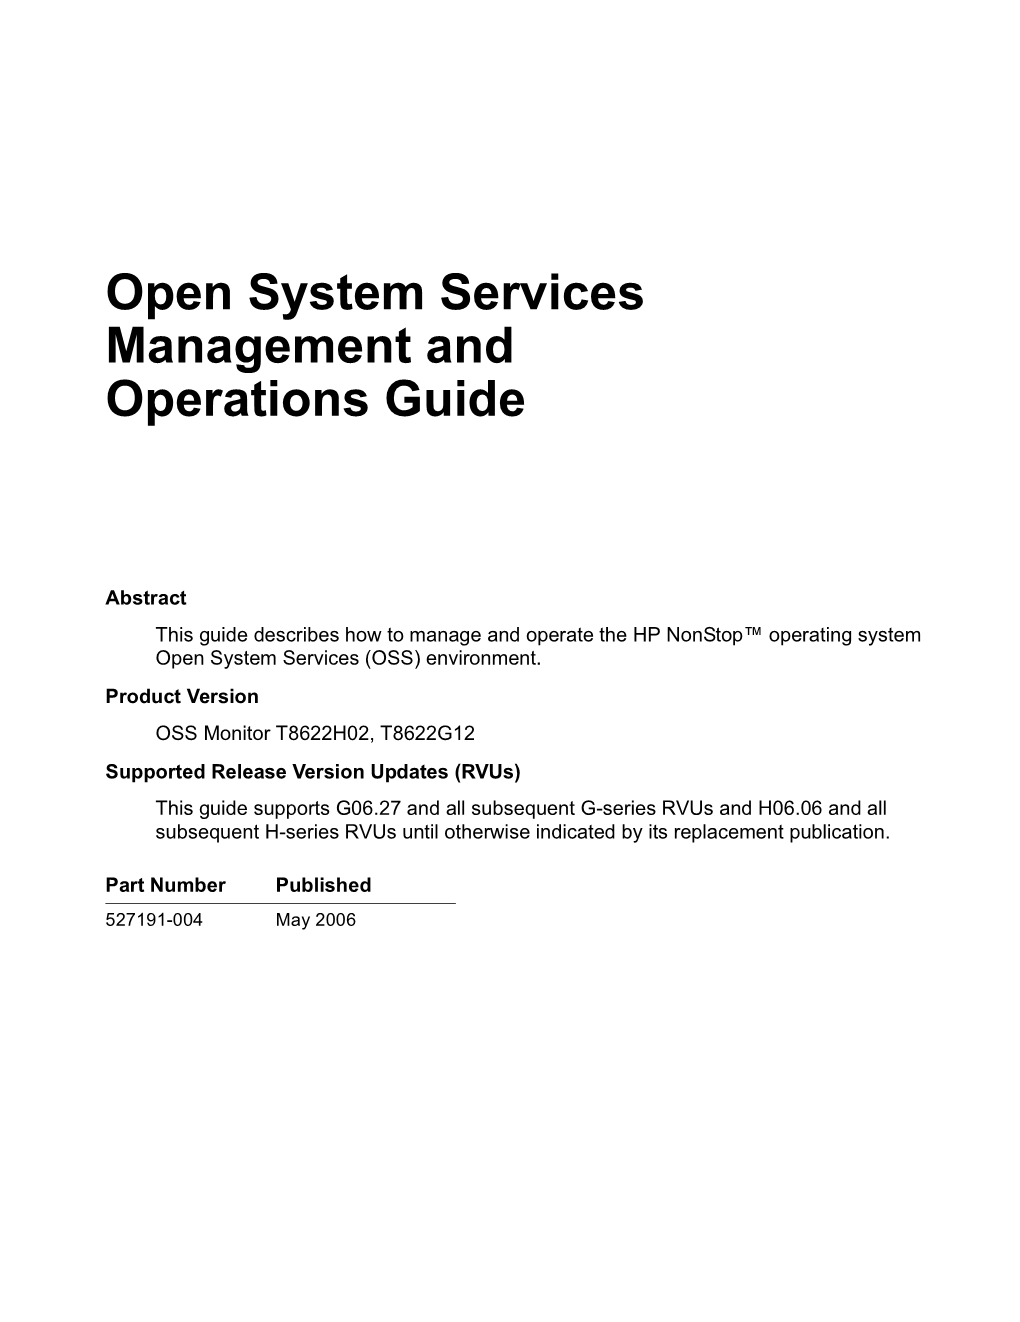 Open System Services Management and Operations Guide